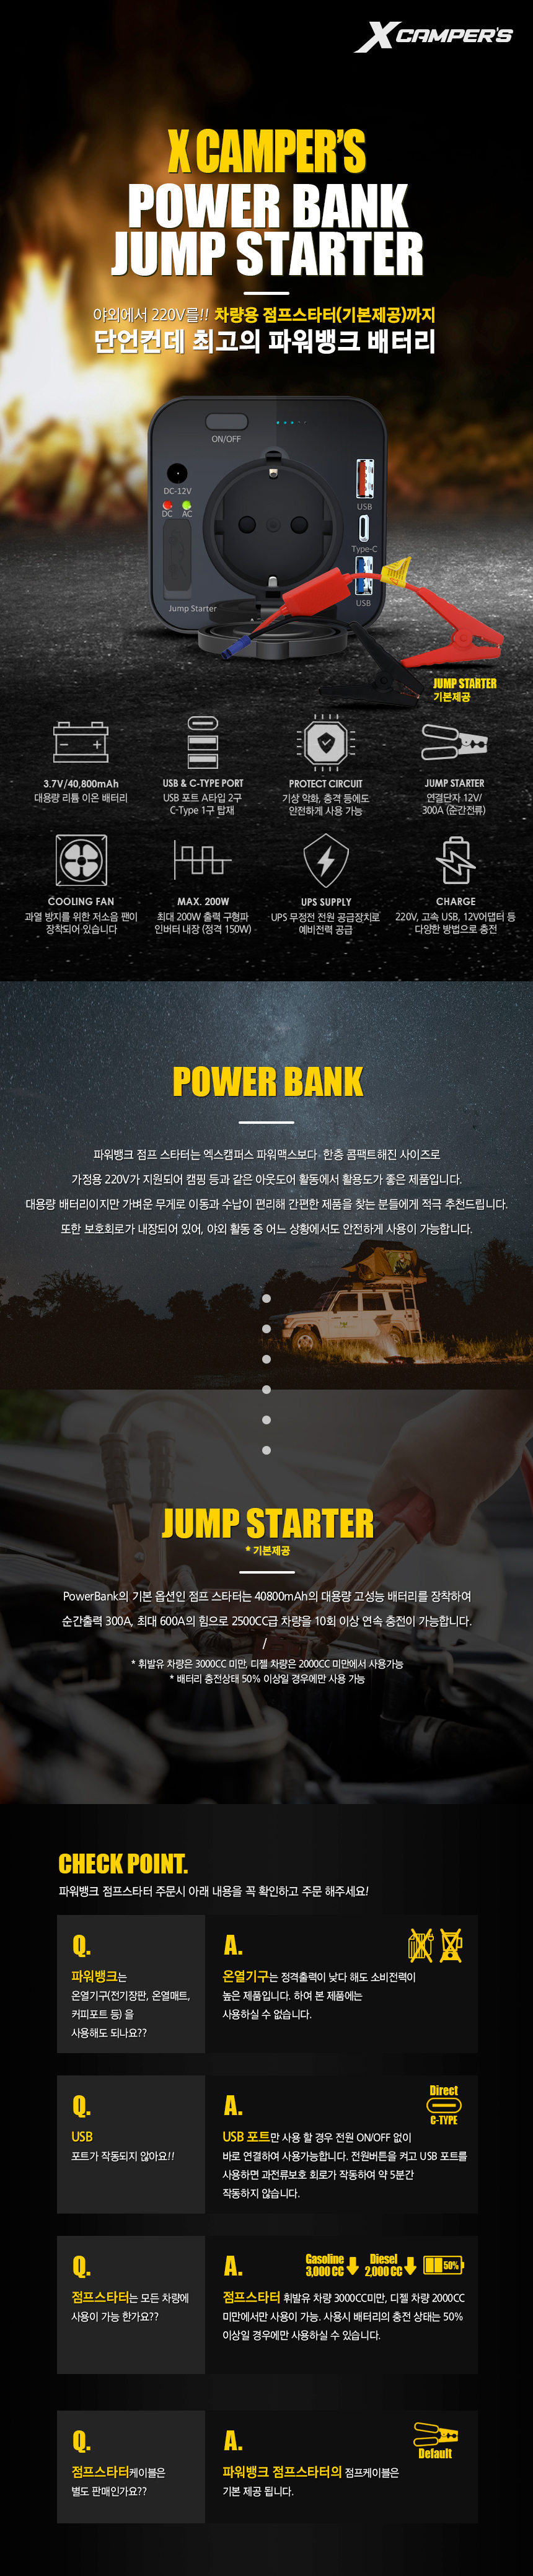 xcampers_powerbank_and_jumpstater_01